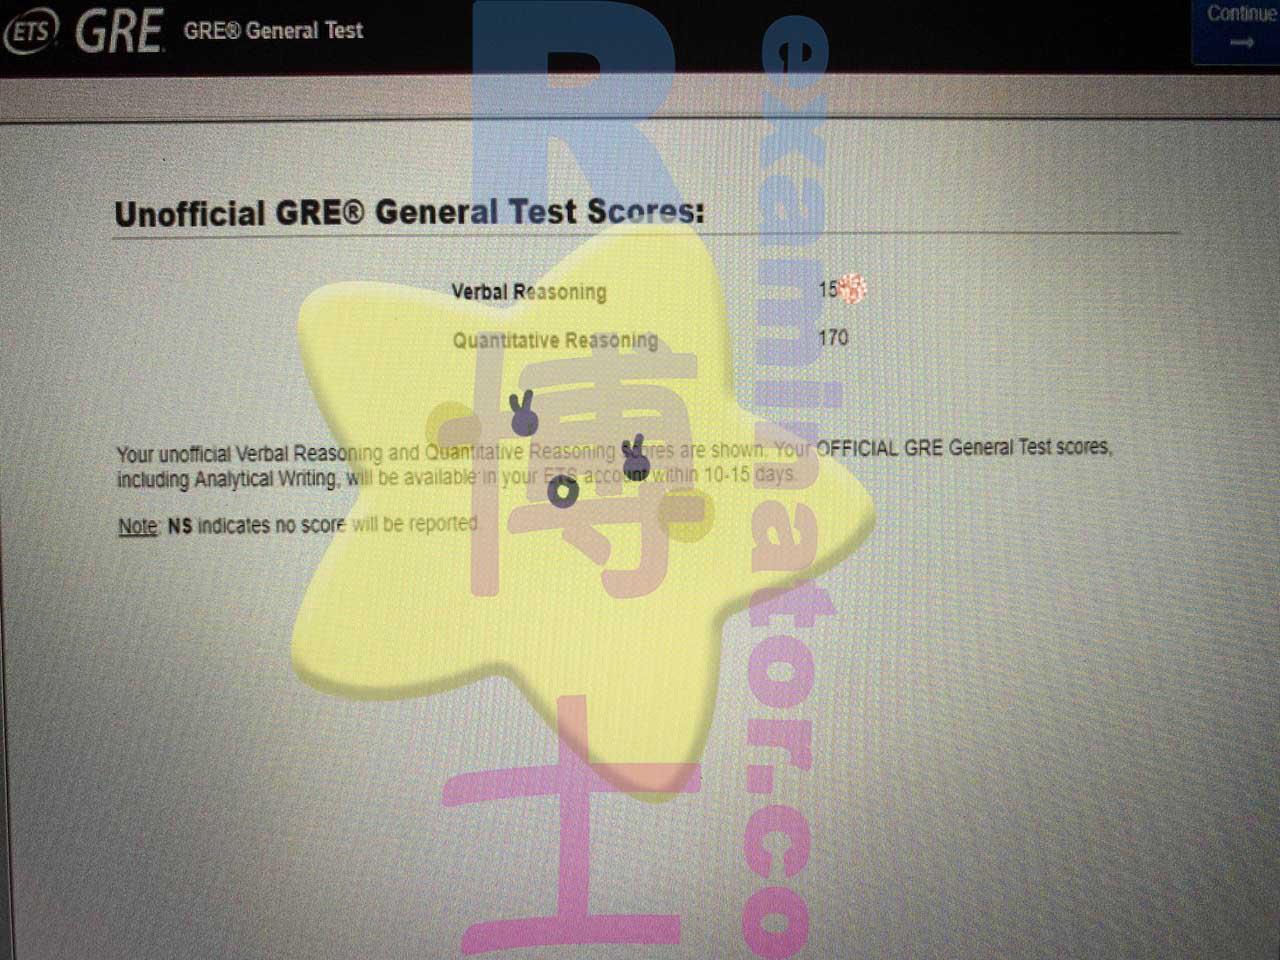 score image for GRE Cheating success story #391